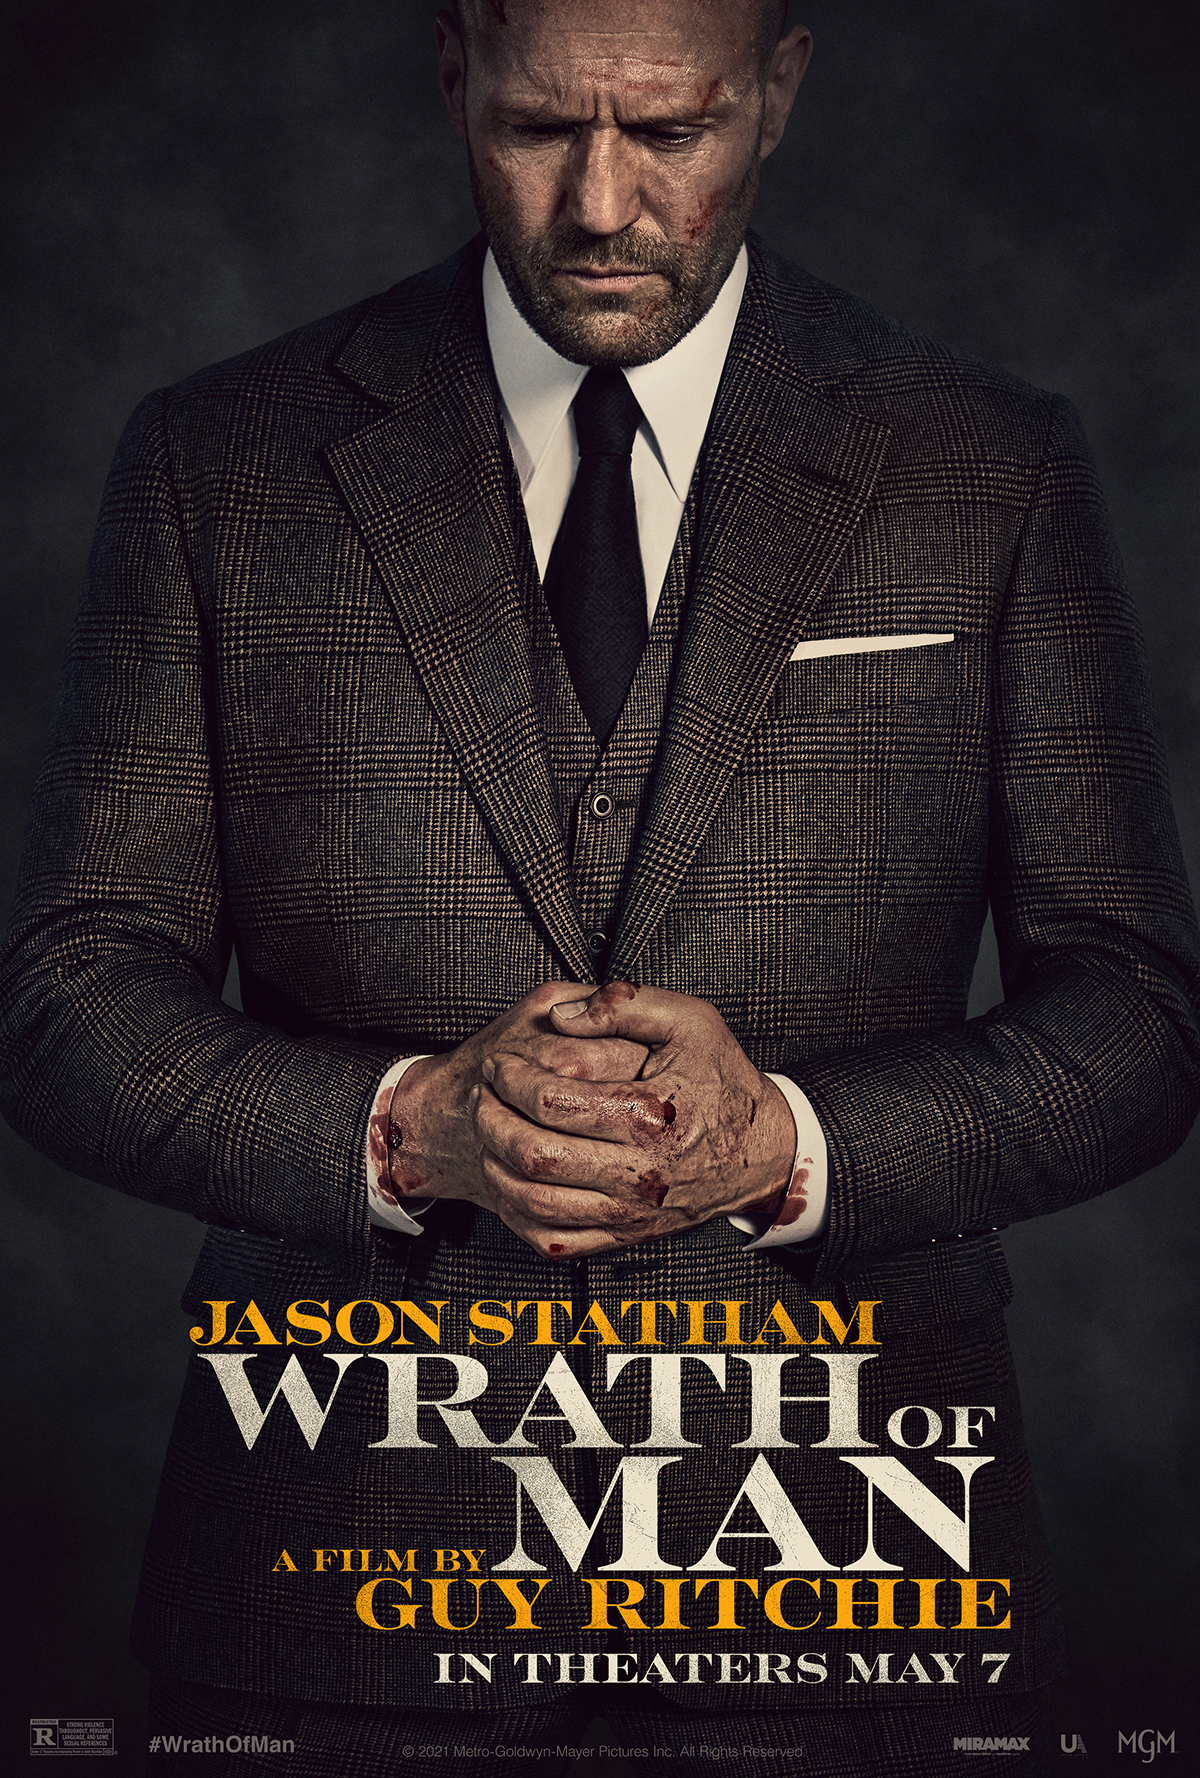 Jason Statham stars as H in director Guy Ritchie's WRATH OF MAN, A Metro Goldwyn Mayer Pictures film. Photo credit: Metro Goldwyn Mayer Pictures © 2021 Metro-Goldwyn-Mayer Pictures Inc. All Rights Reserved